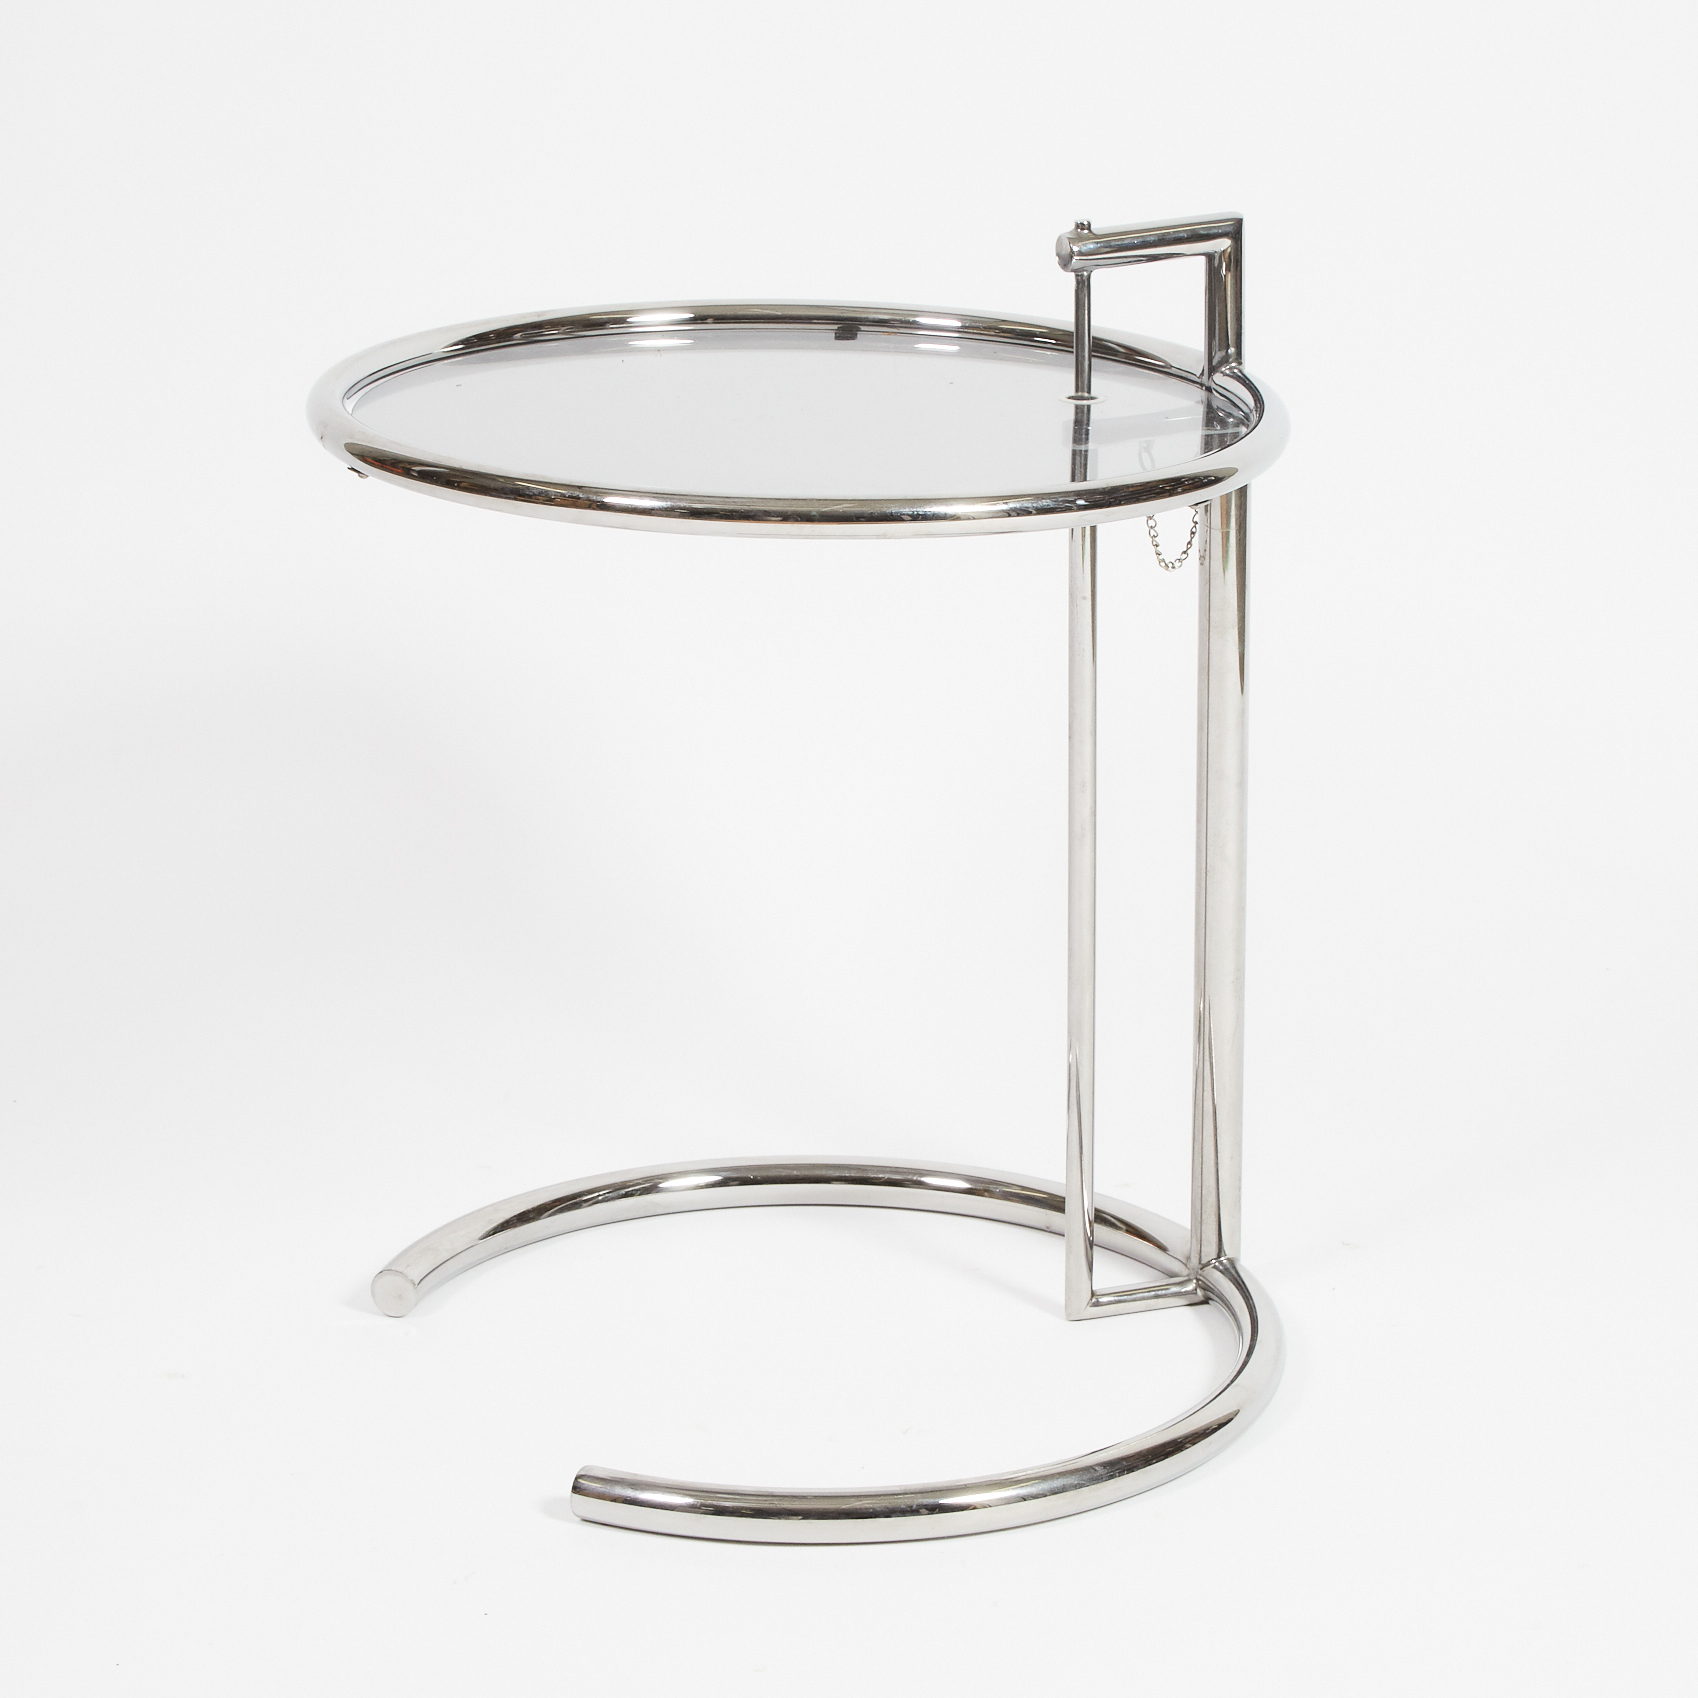 Adjustable Table E 1027 by Eileen Gray c.1984